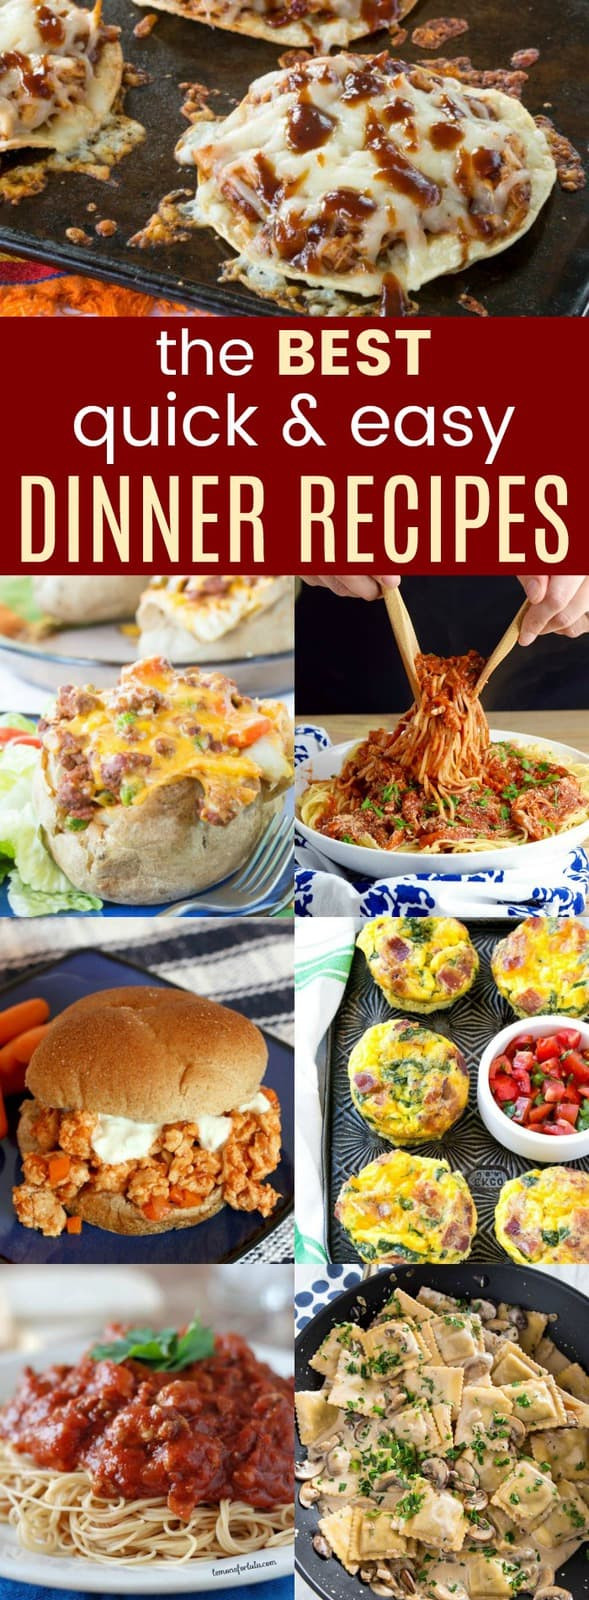 Best Quick Dinner Recipes
 42 of the Best Quick and Easy Dinner Ideas Cupcakes